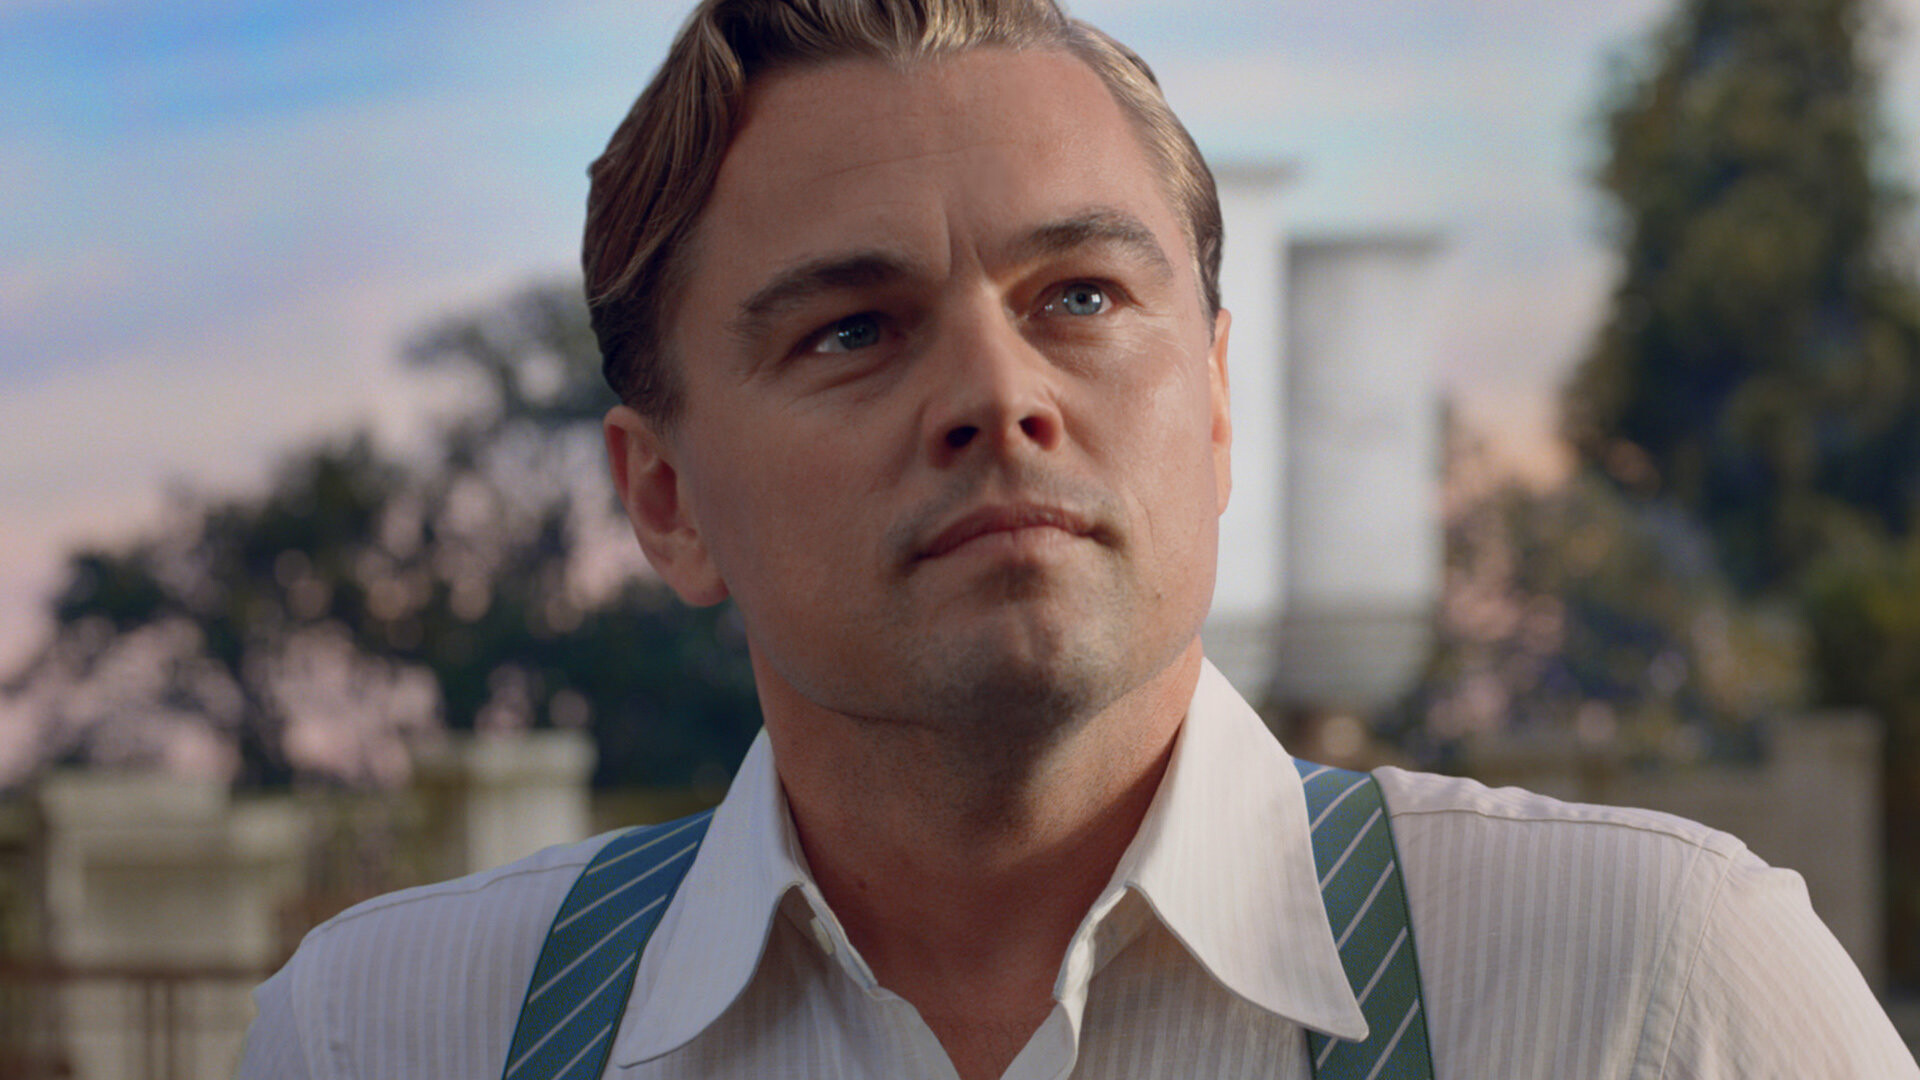 The Great Gatsby: Leonardo DiCaprio, The recipient of numerous accolades, including an Academy Award. 1920x1080 Full HD Background.